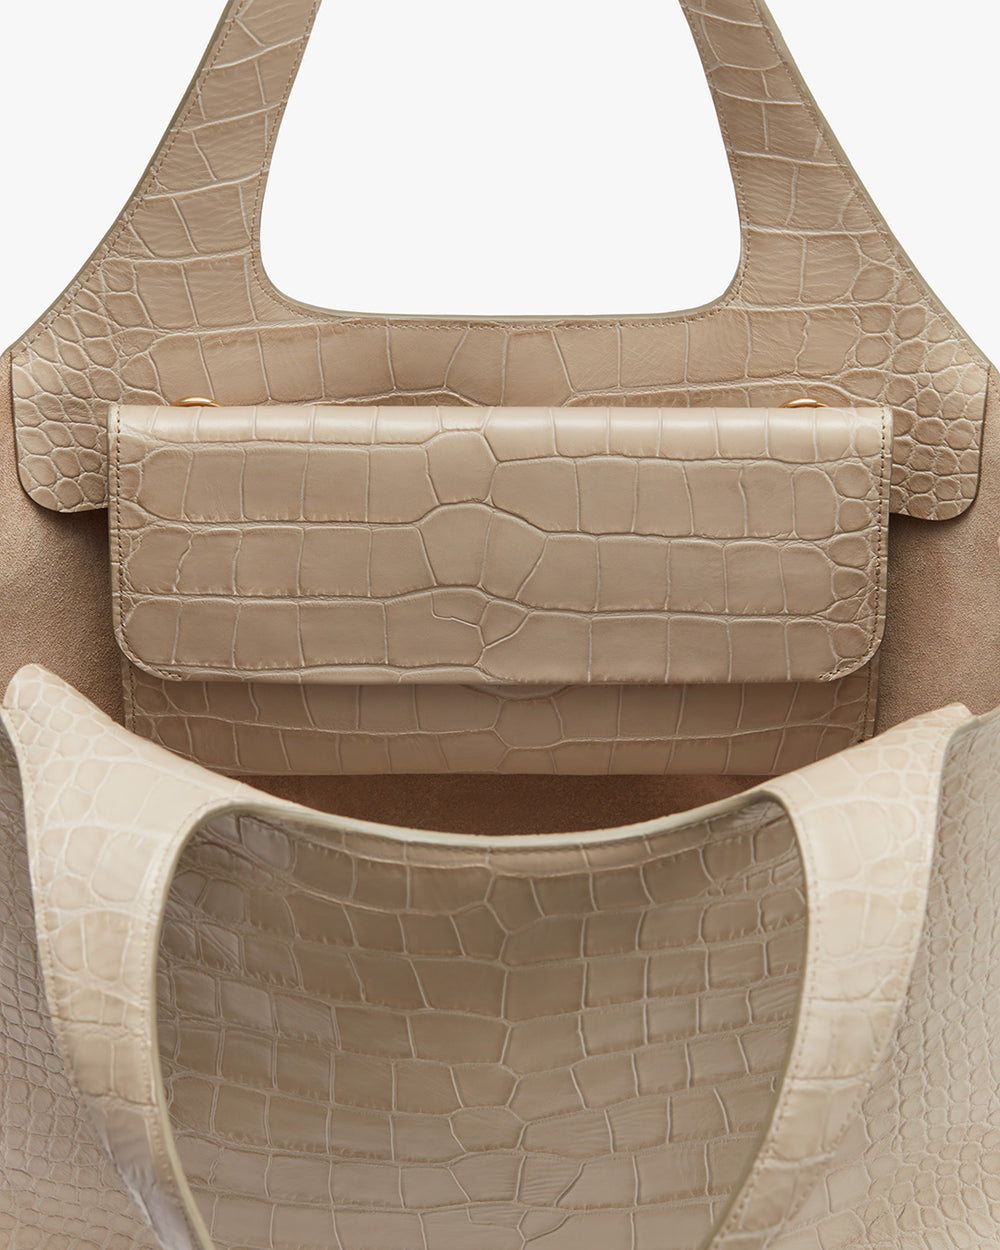 Two handbags with textured surface, one nested inside the other.